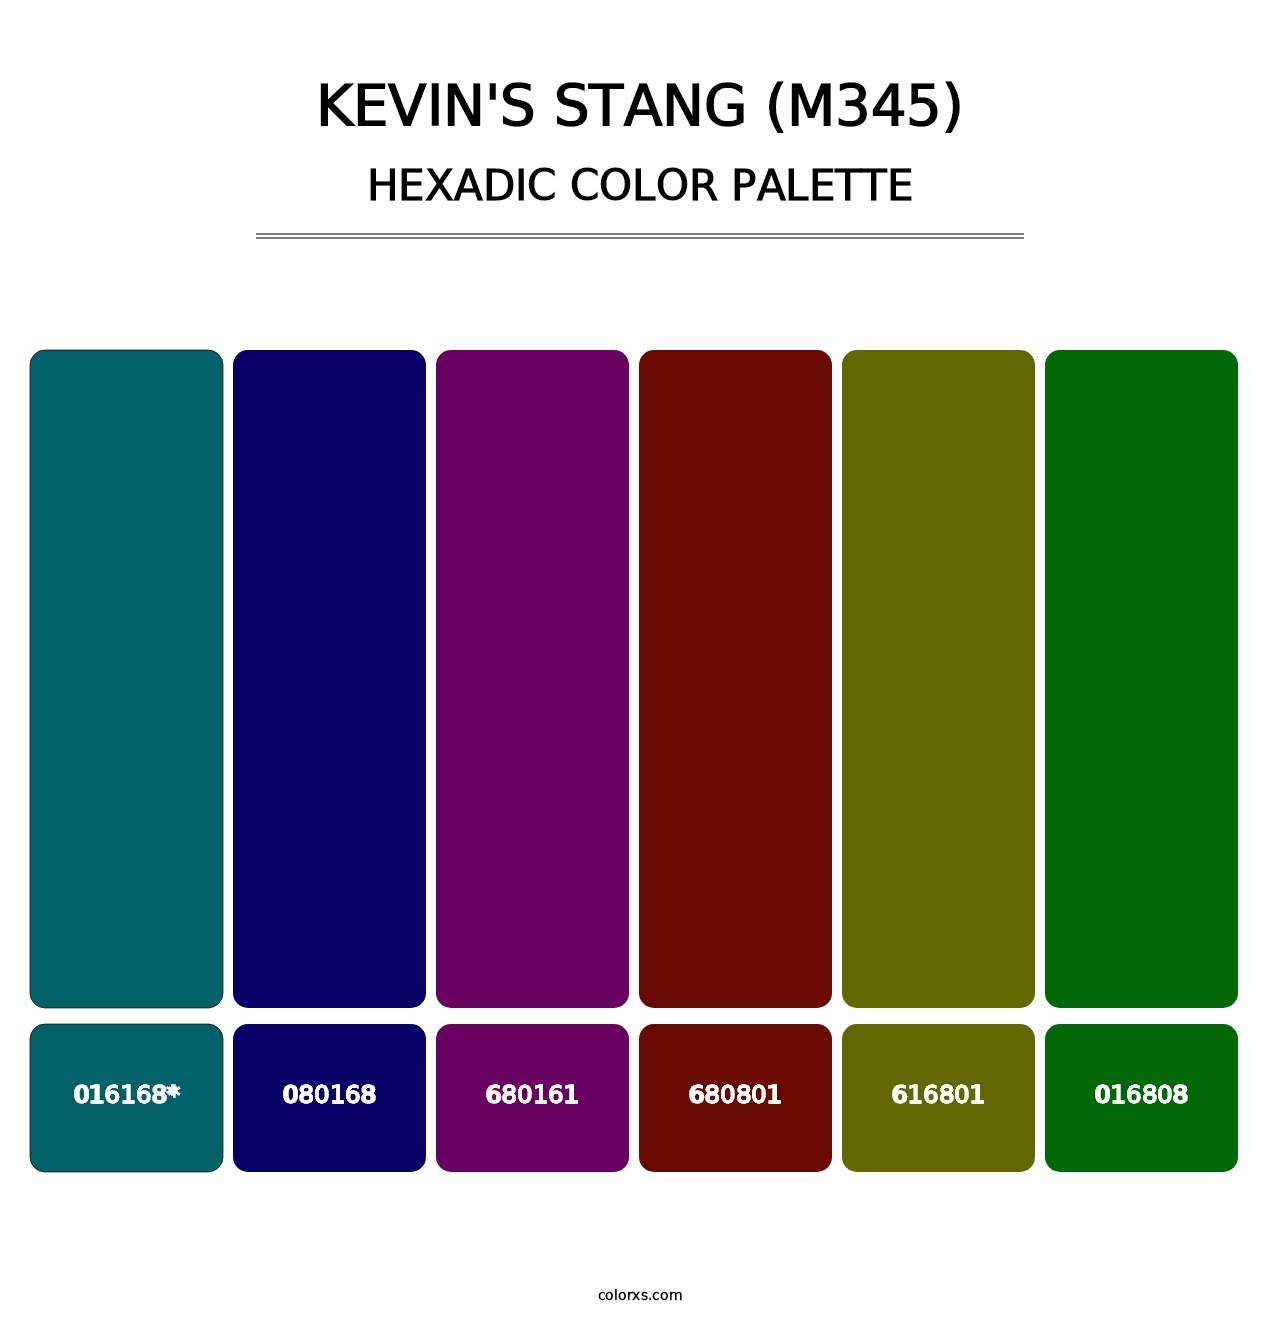 Kevin's Stang (M345) - Hexadic Color Palette